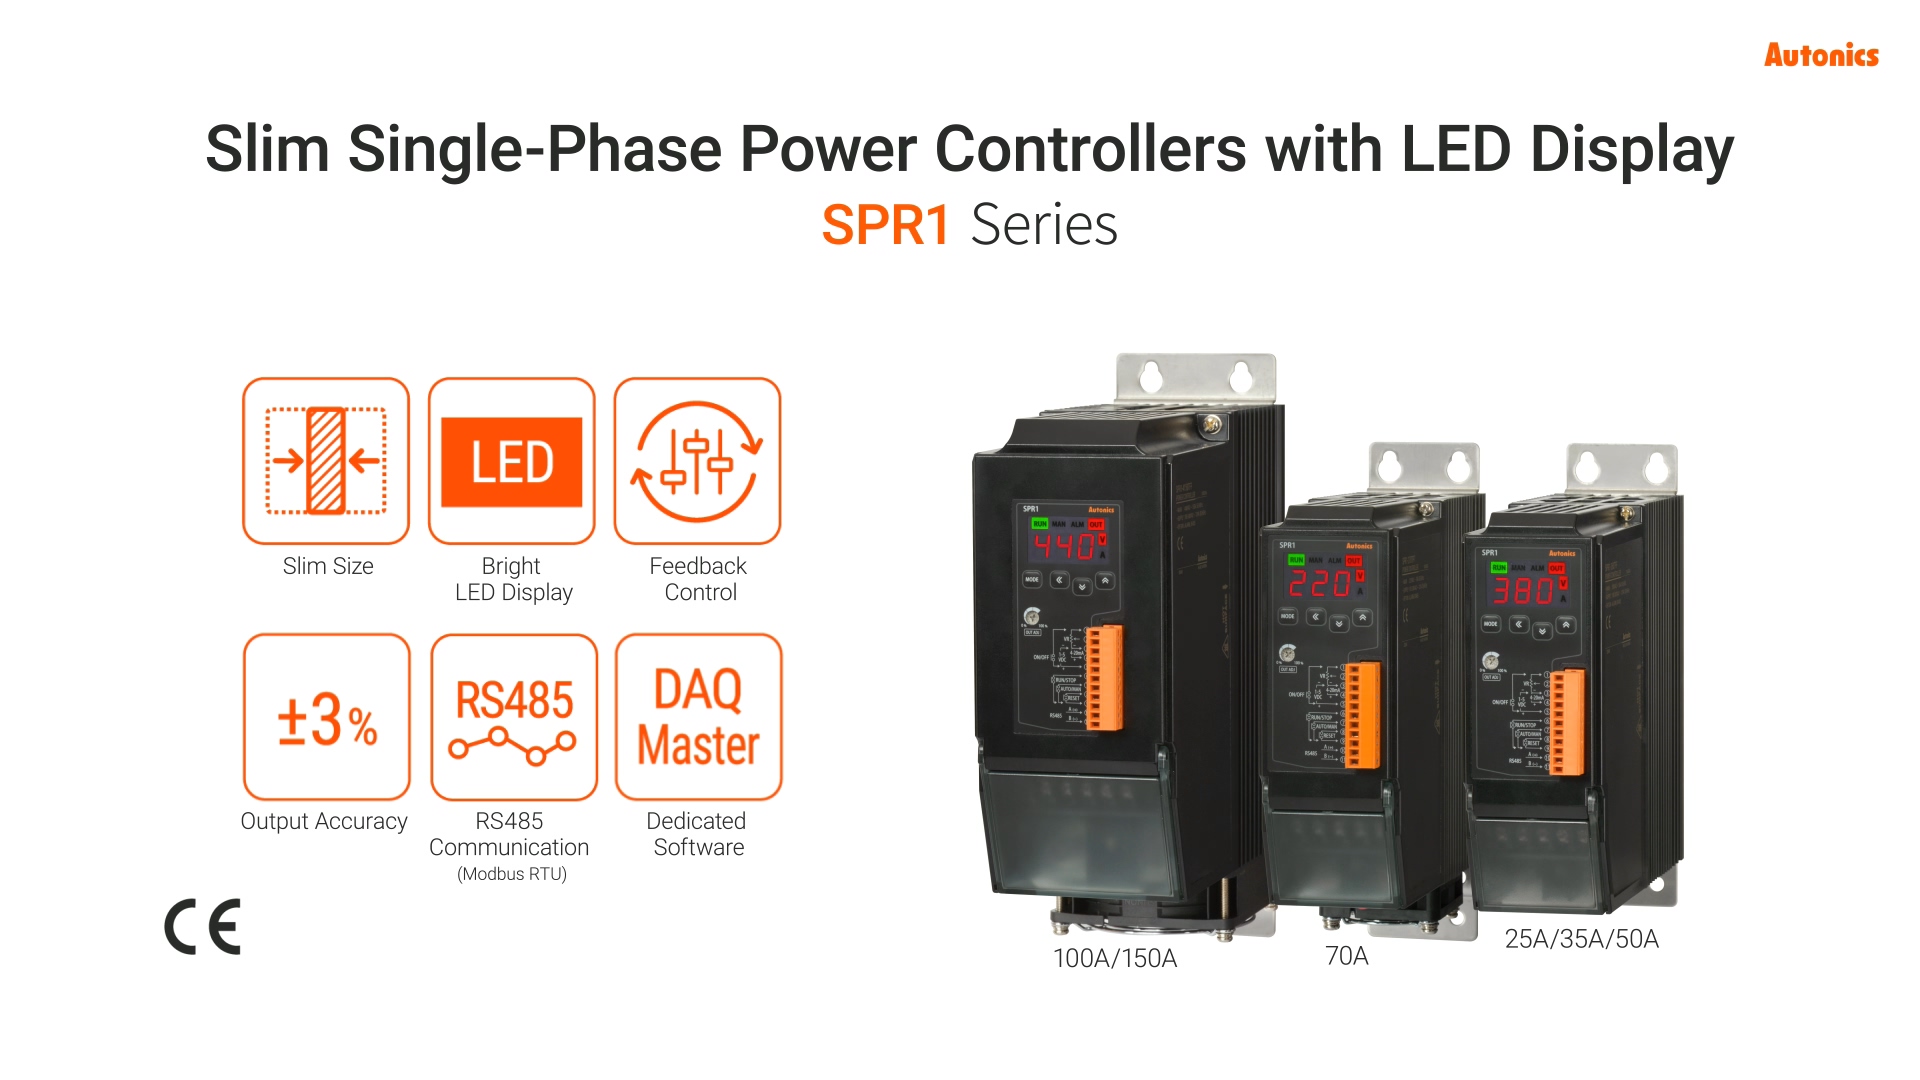 Autonics : Slim Single-Phase Power Controllers with LED Display SPR1 Series